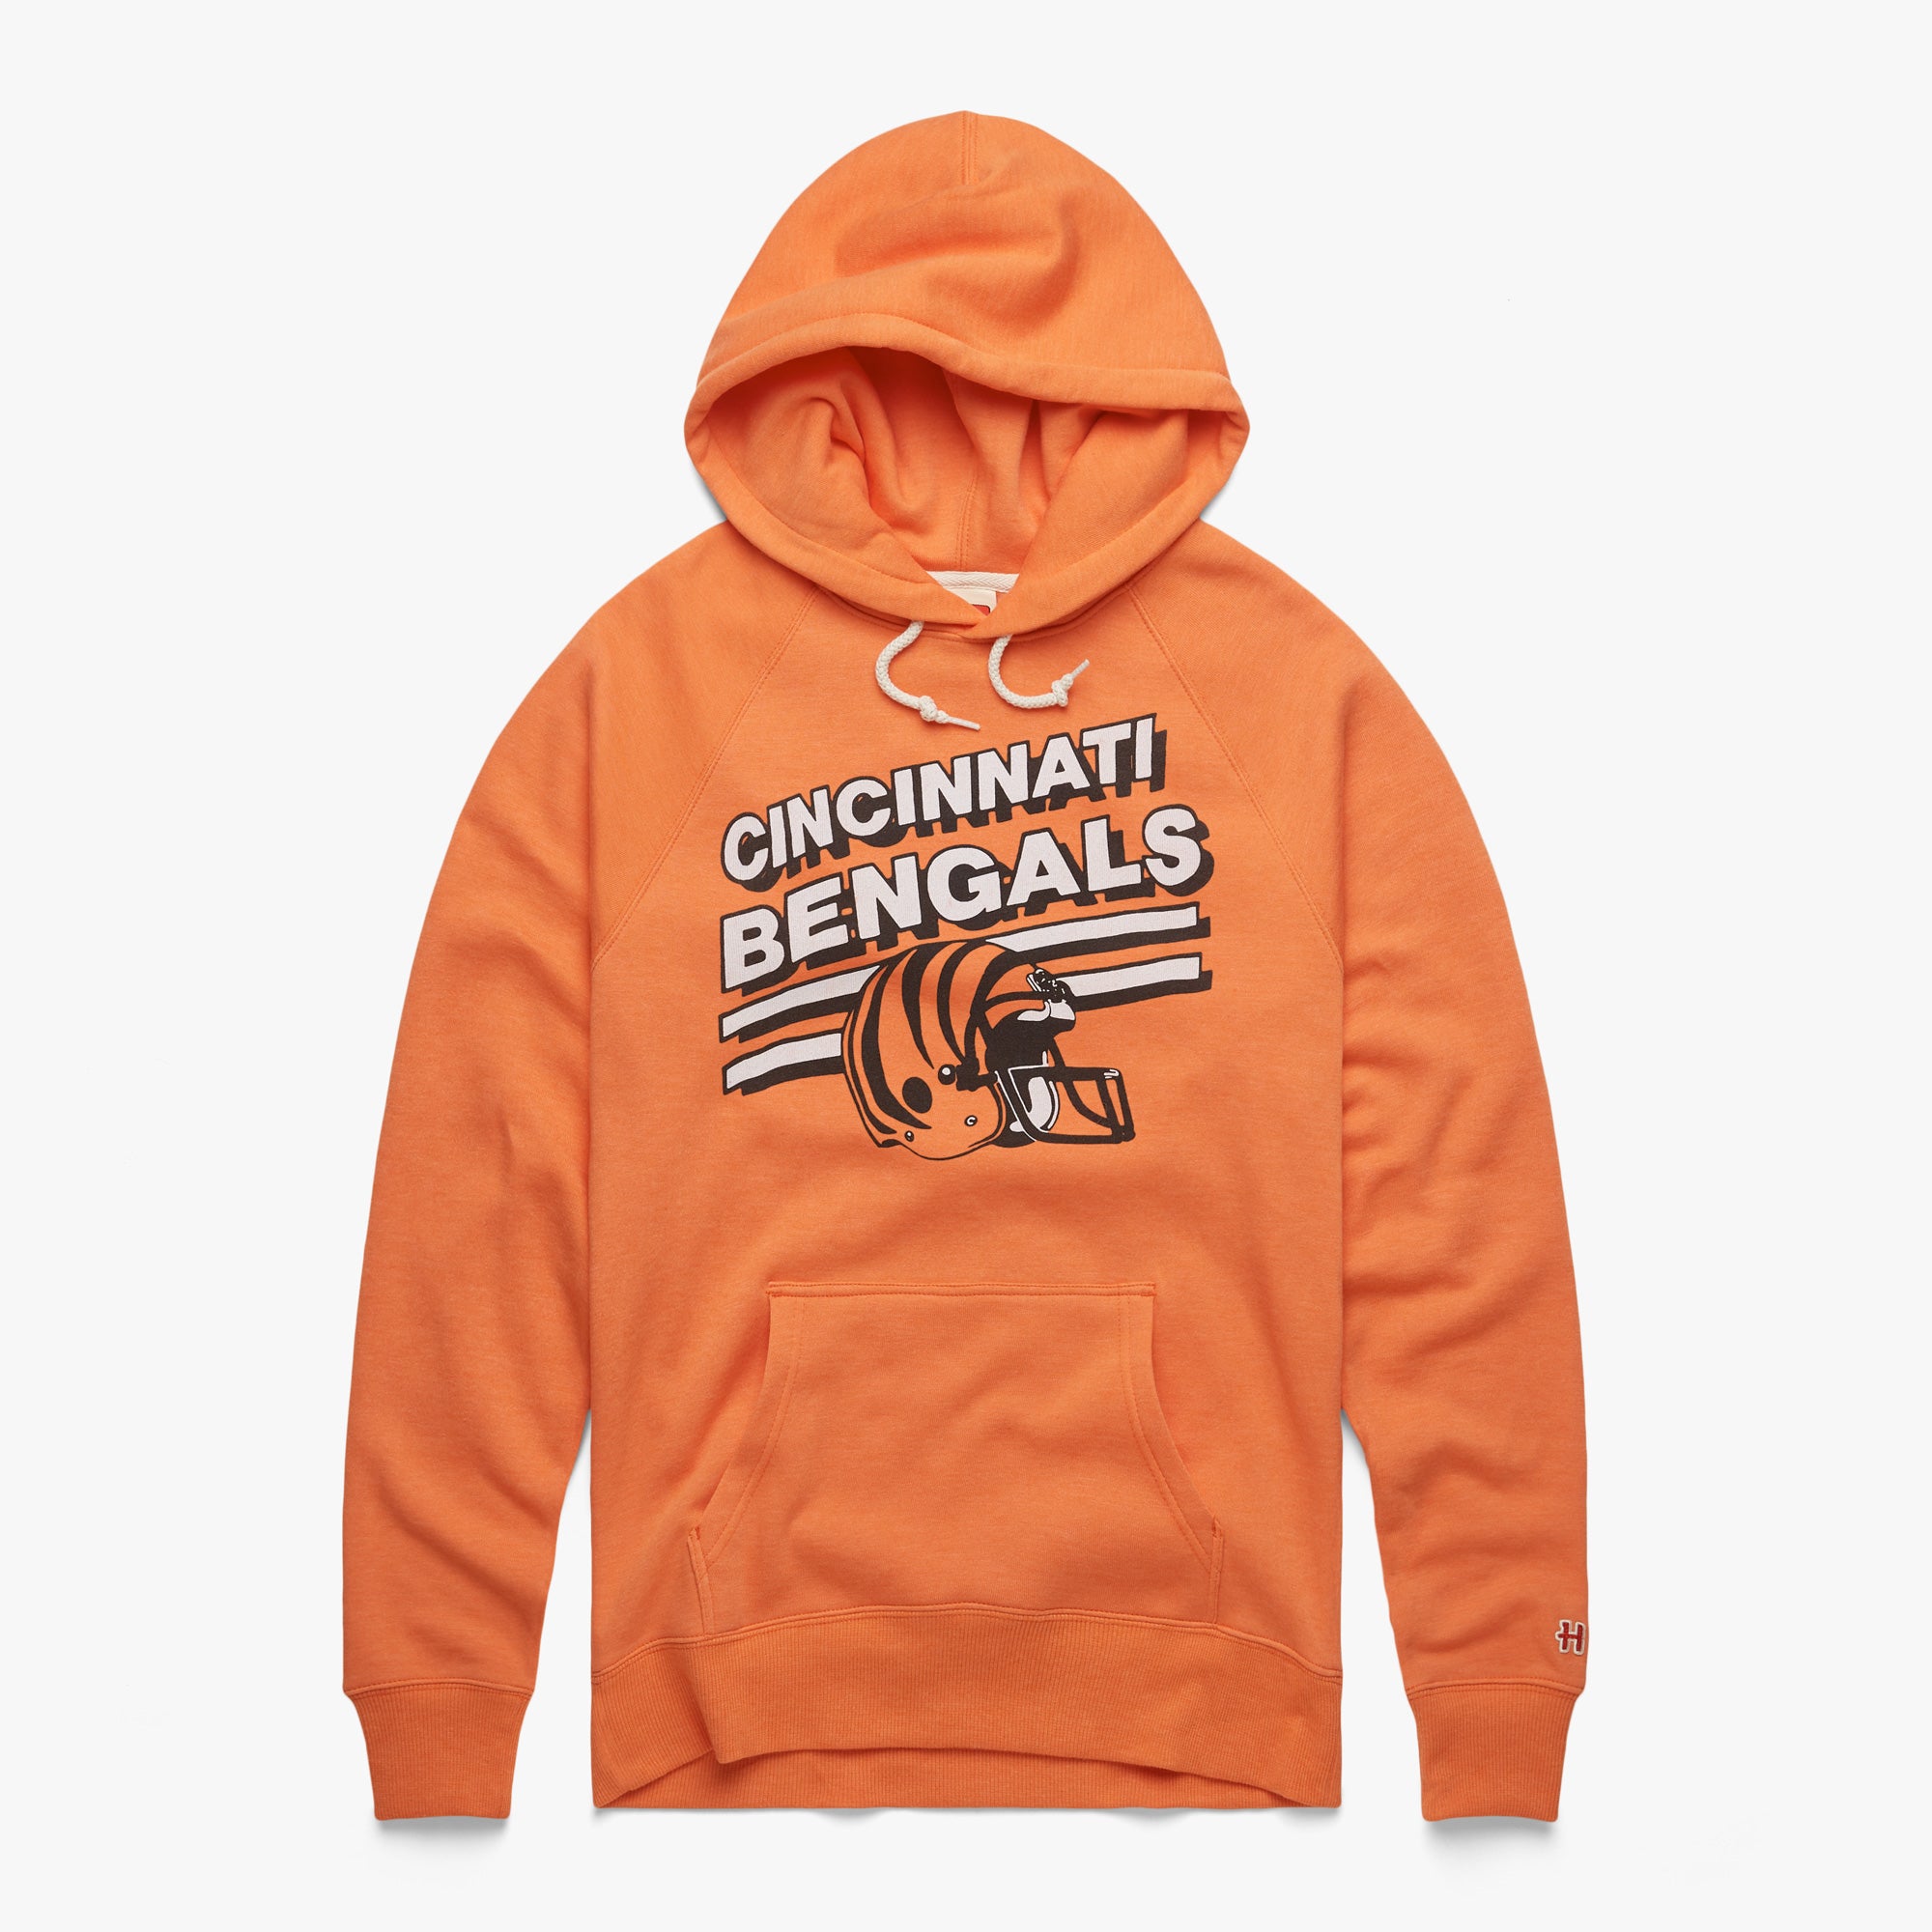 Cincinnati Bengals Stripes Hoodie from Homage. | Officially Licensed Vintage NFL Apparel from Homage Pro Shop.